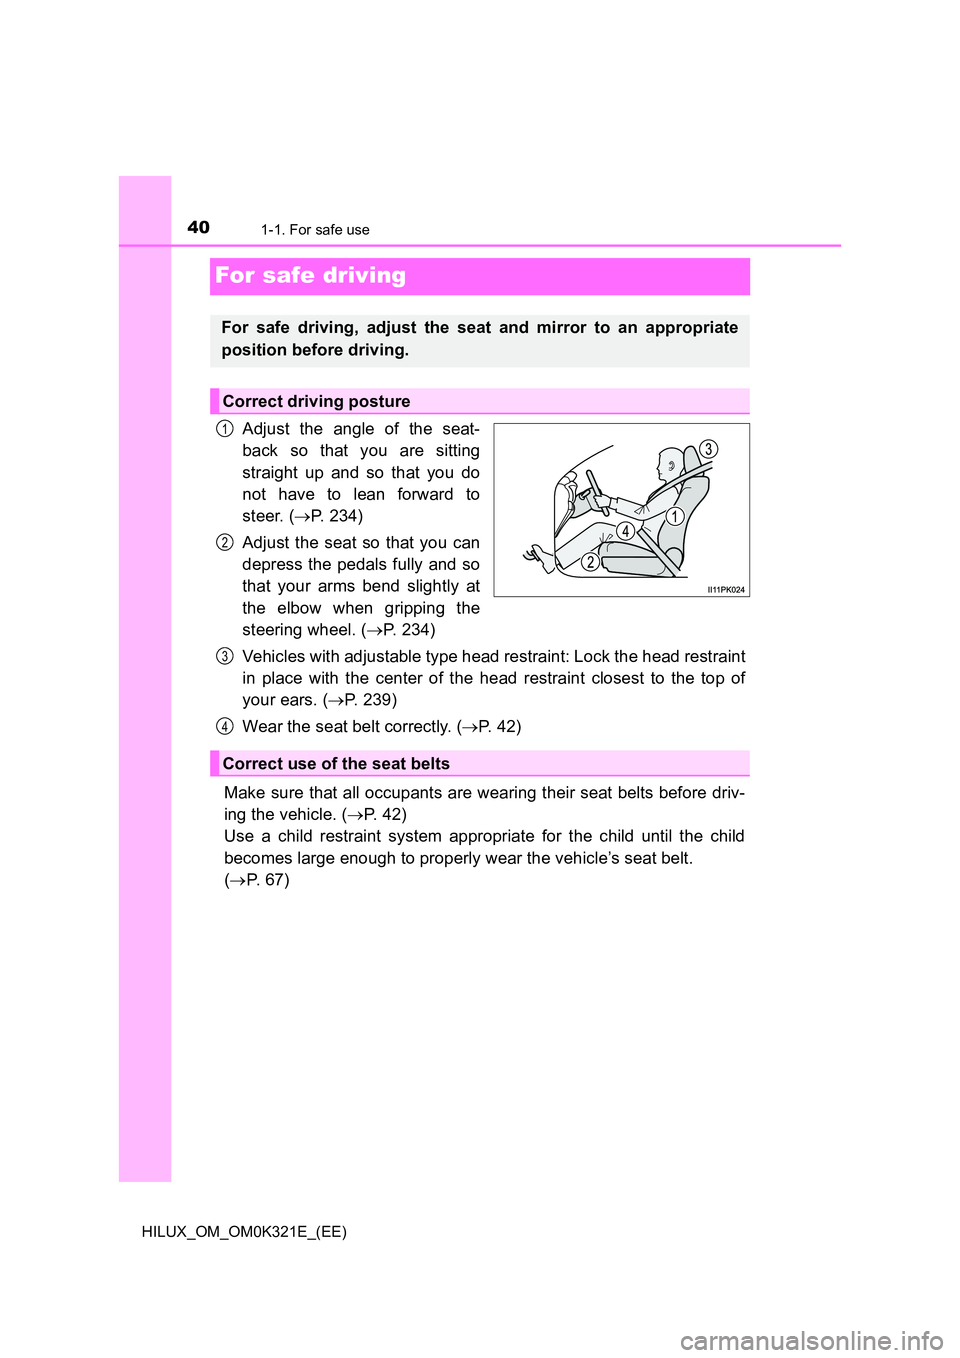 TOYOTA HILUX 2020  Owners Manual (in English) 401-1. For safe use
HILUX_OM_OM0K321E_(EE)
For safe driving
Adjust the angle of the seat- 
back so that you are sitting 
straight up and so that you do 
not have to lean forward to 
steer. ( P. 234